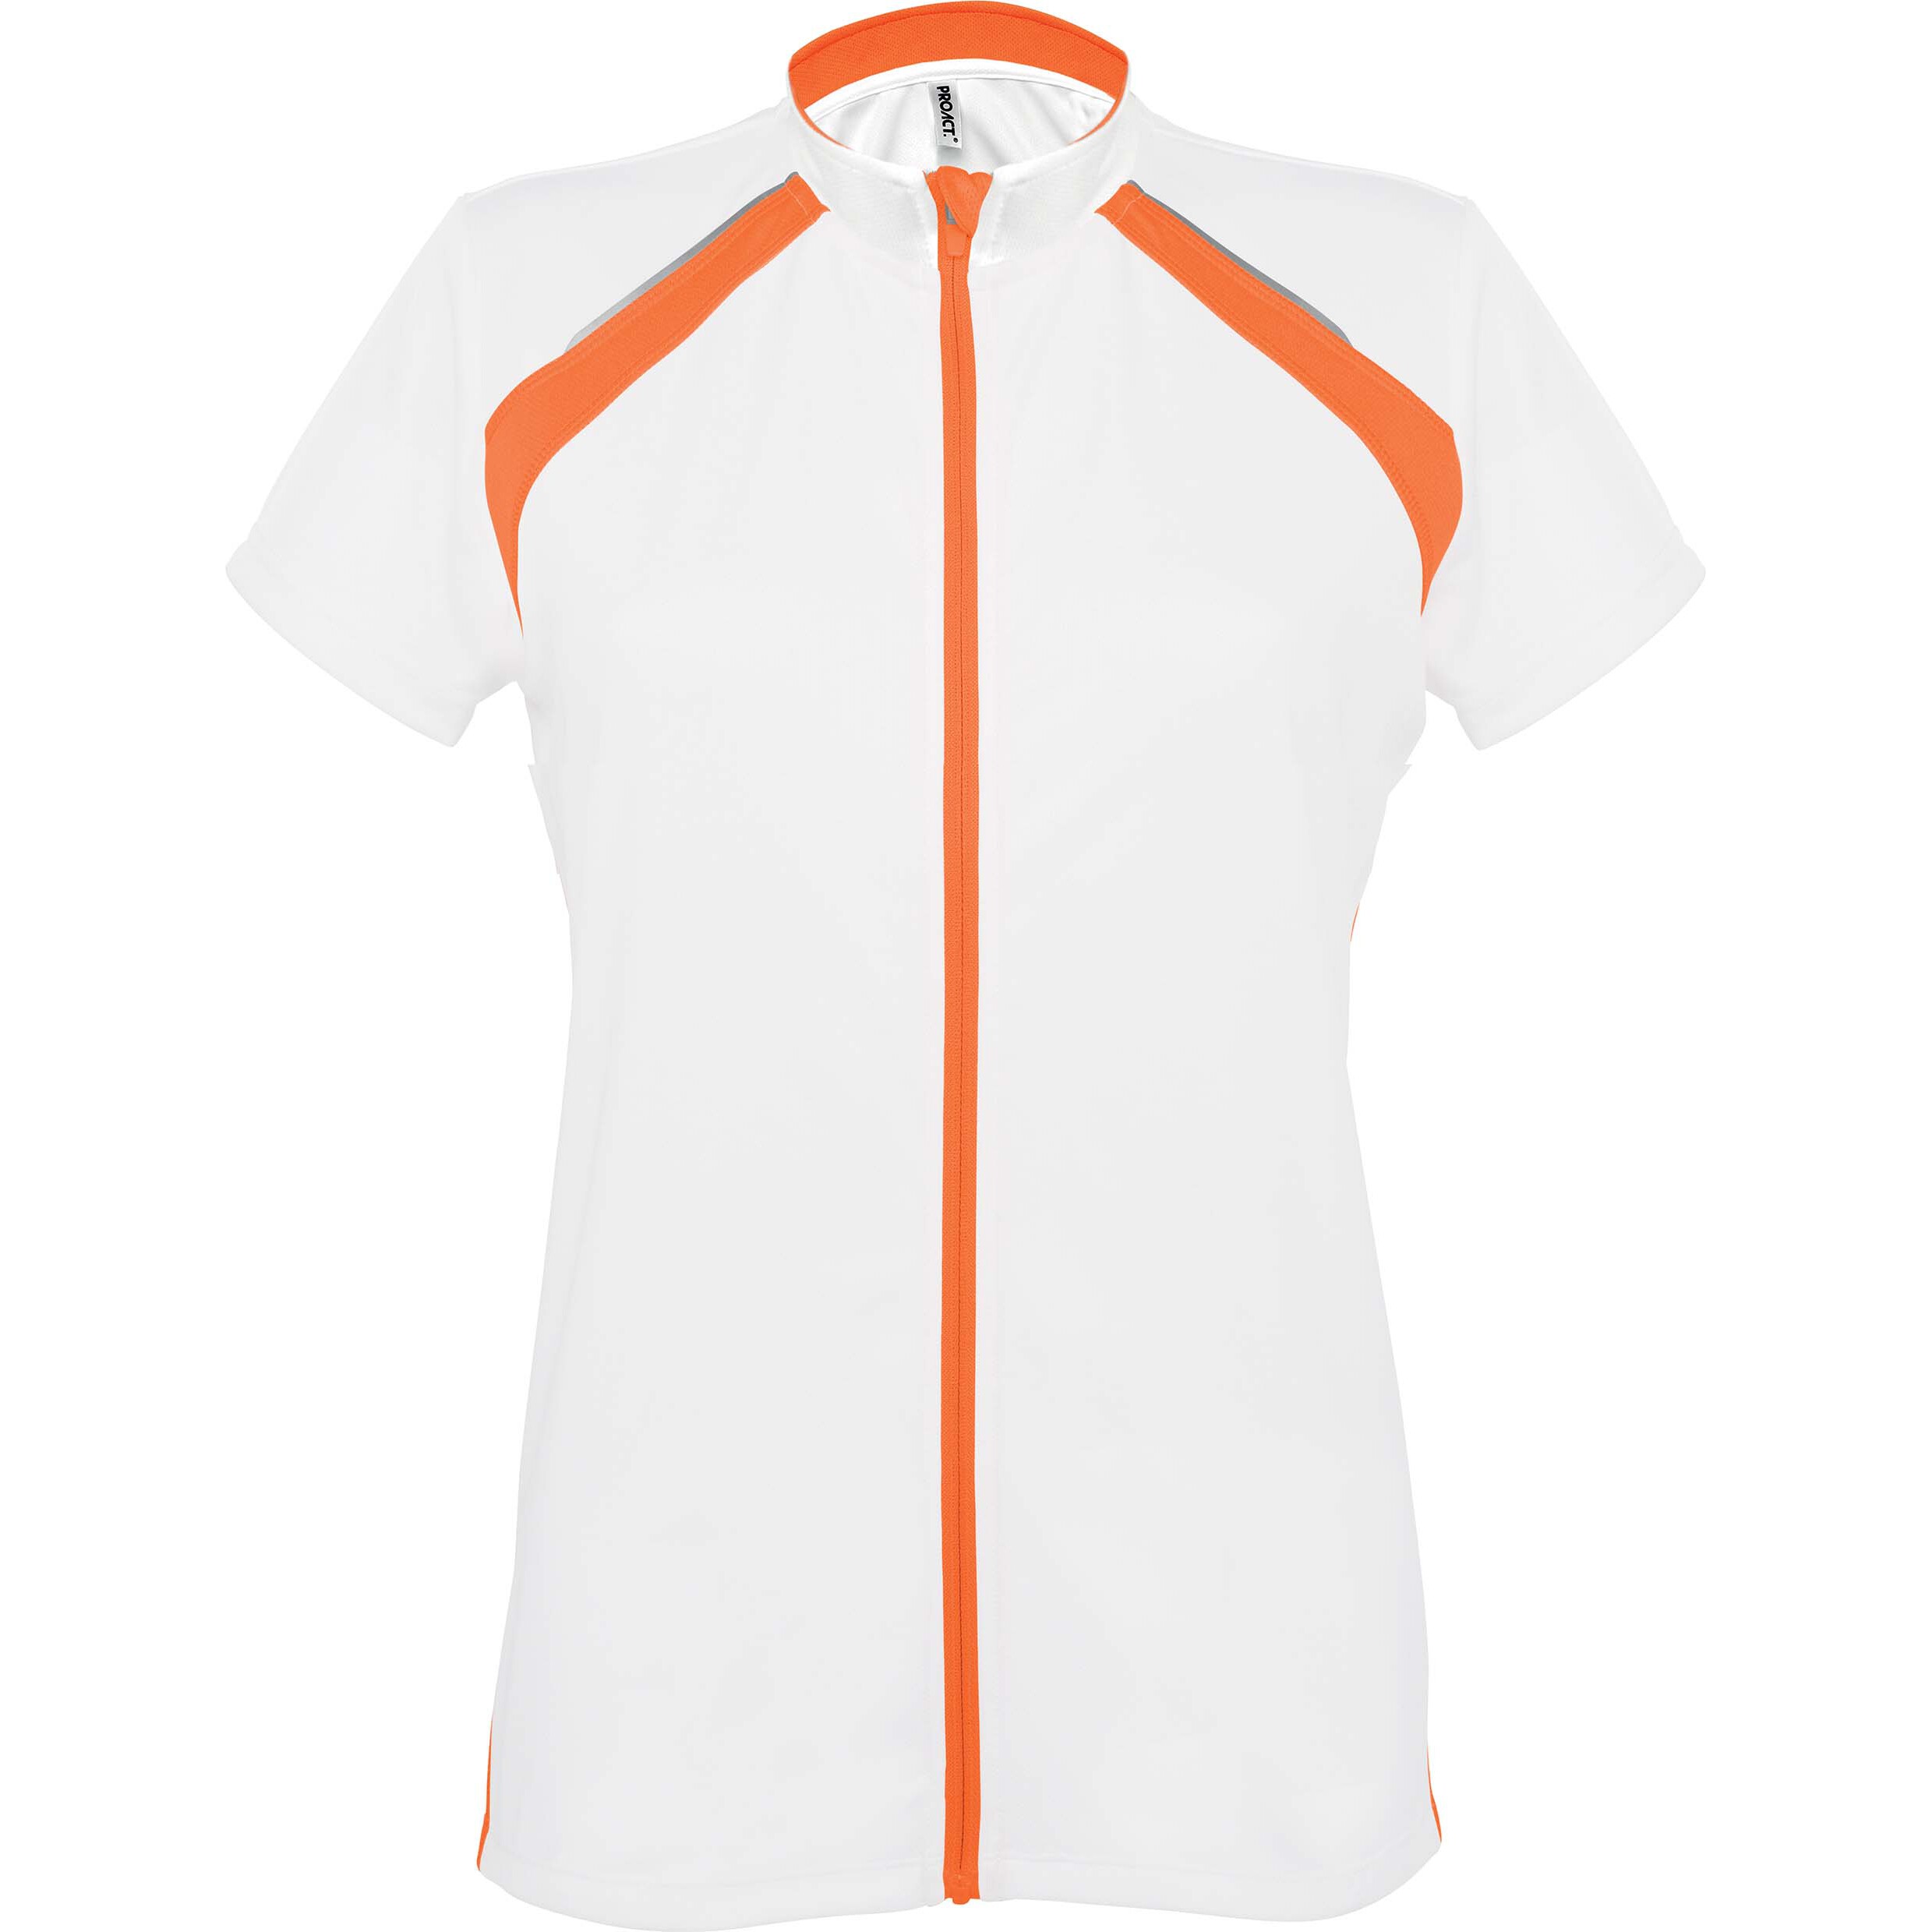 Maillot femme Proact Cycliste